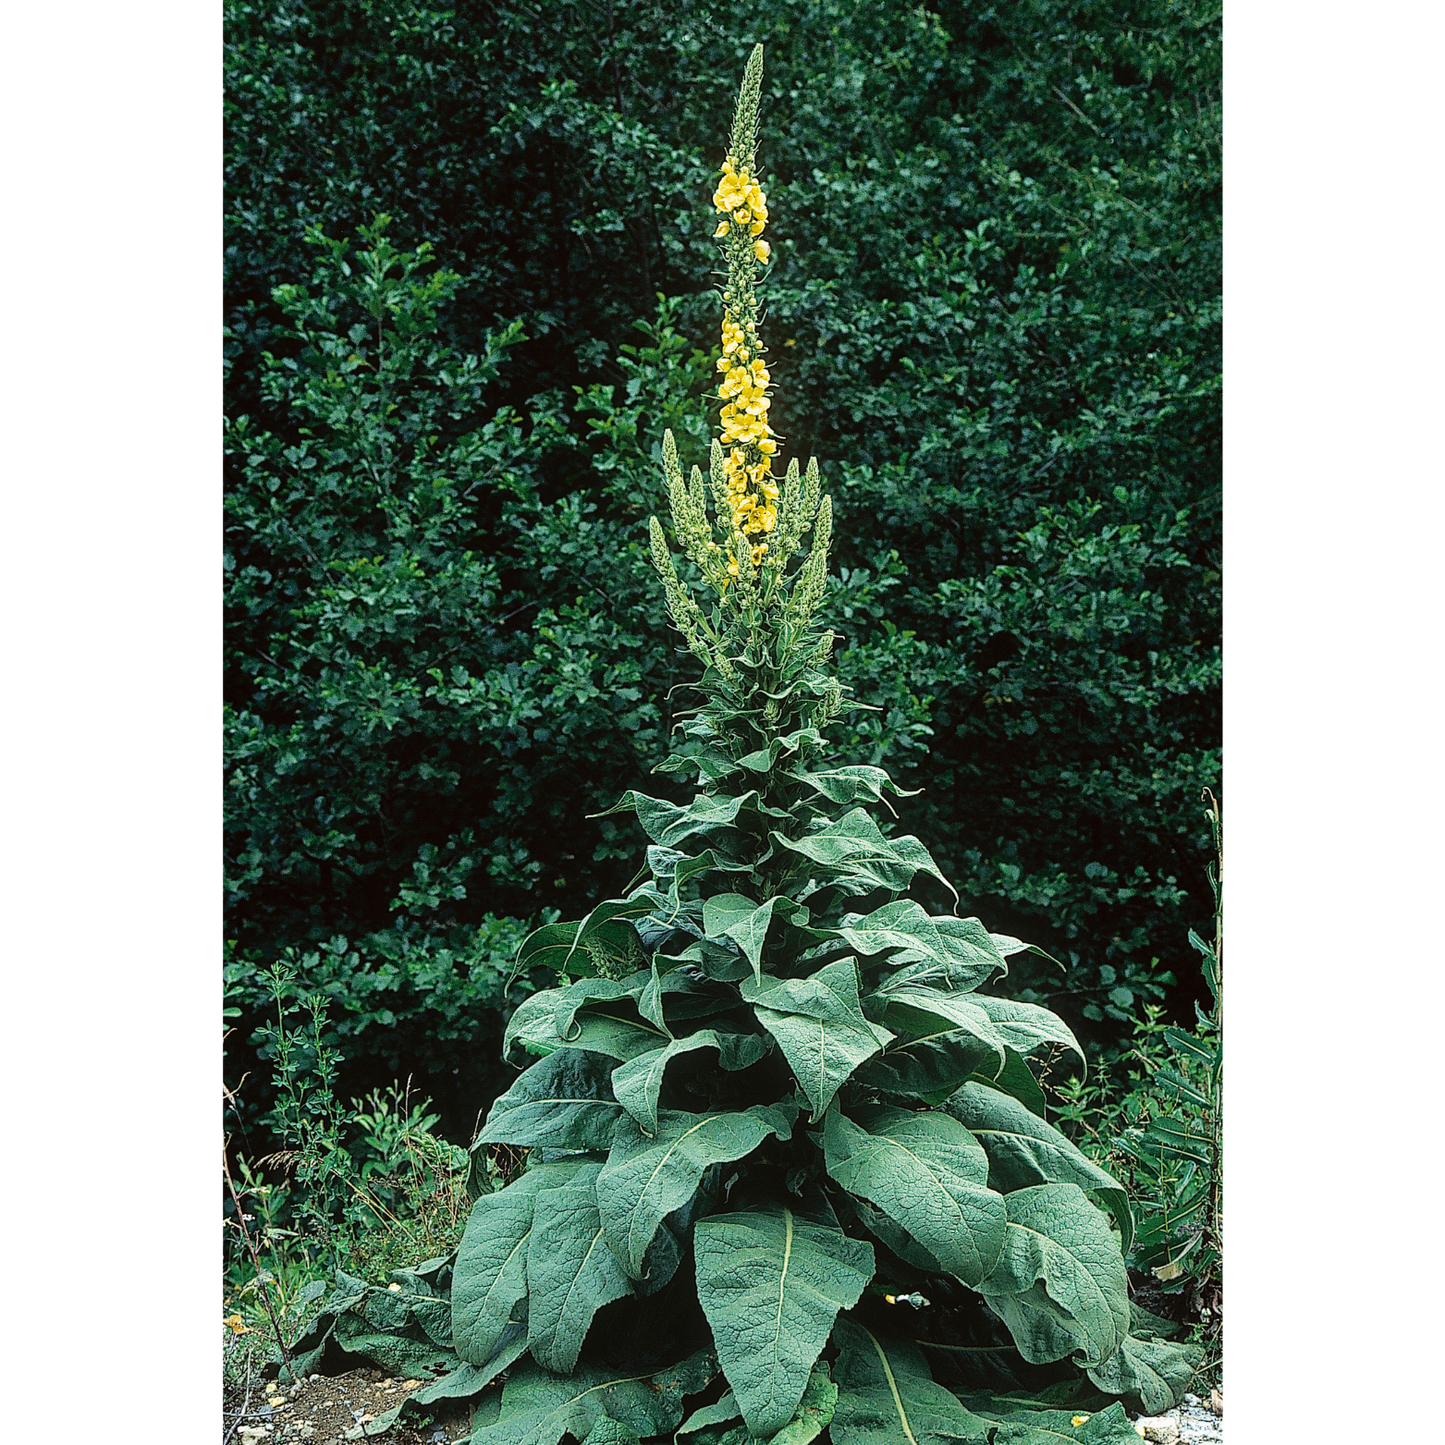 Mullein Leaf Herb for Smudging, Ritual to Cleanse and Empower the Aura